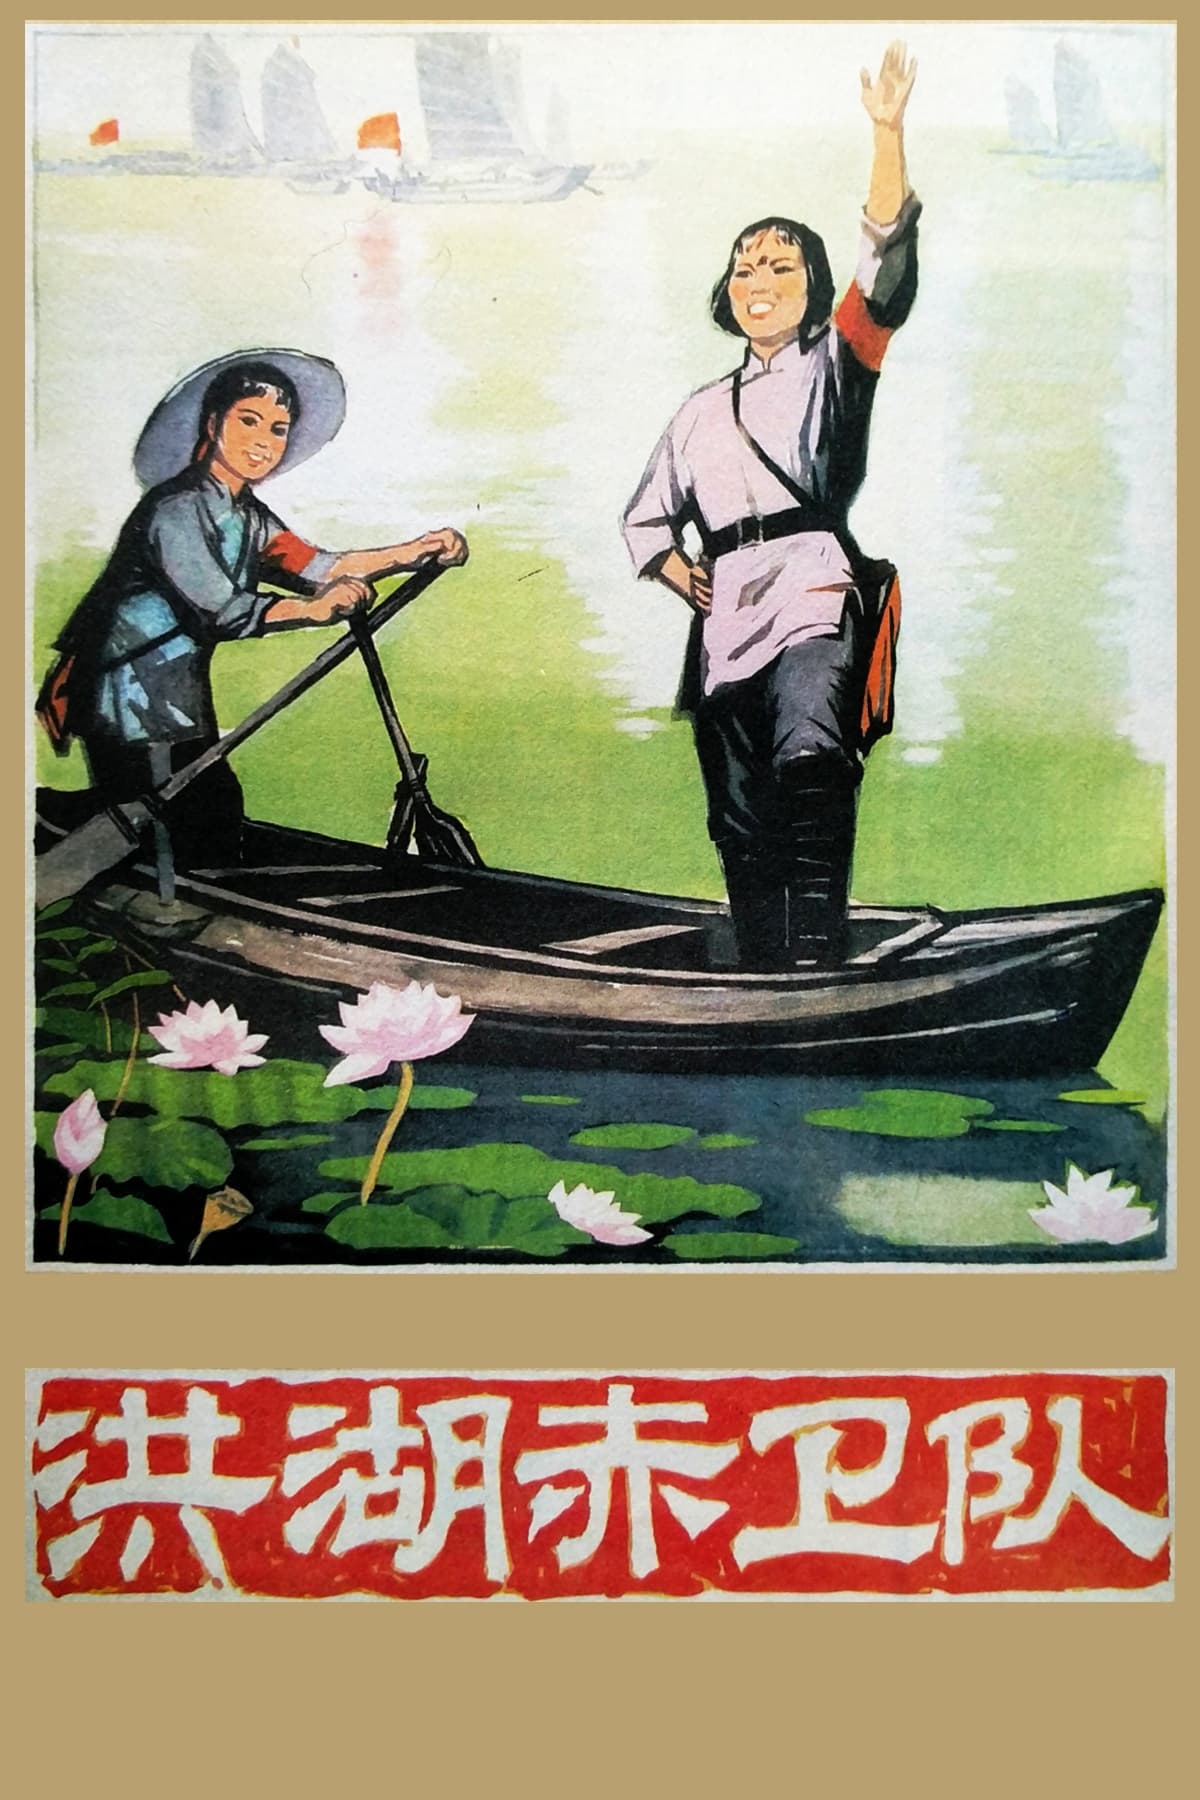 The Red Guards On Honghu Lake (1961)